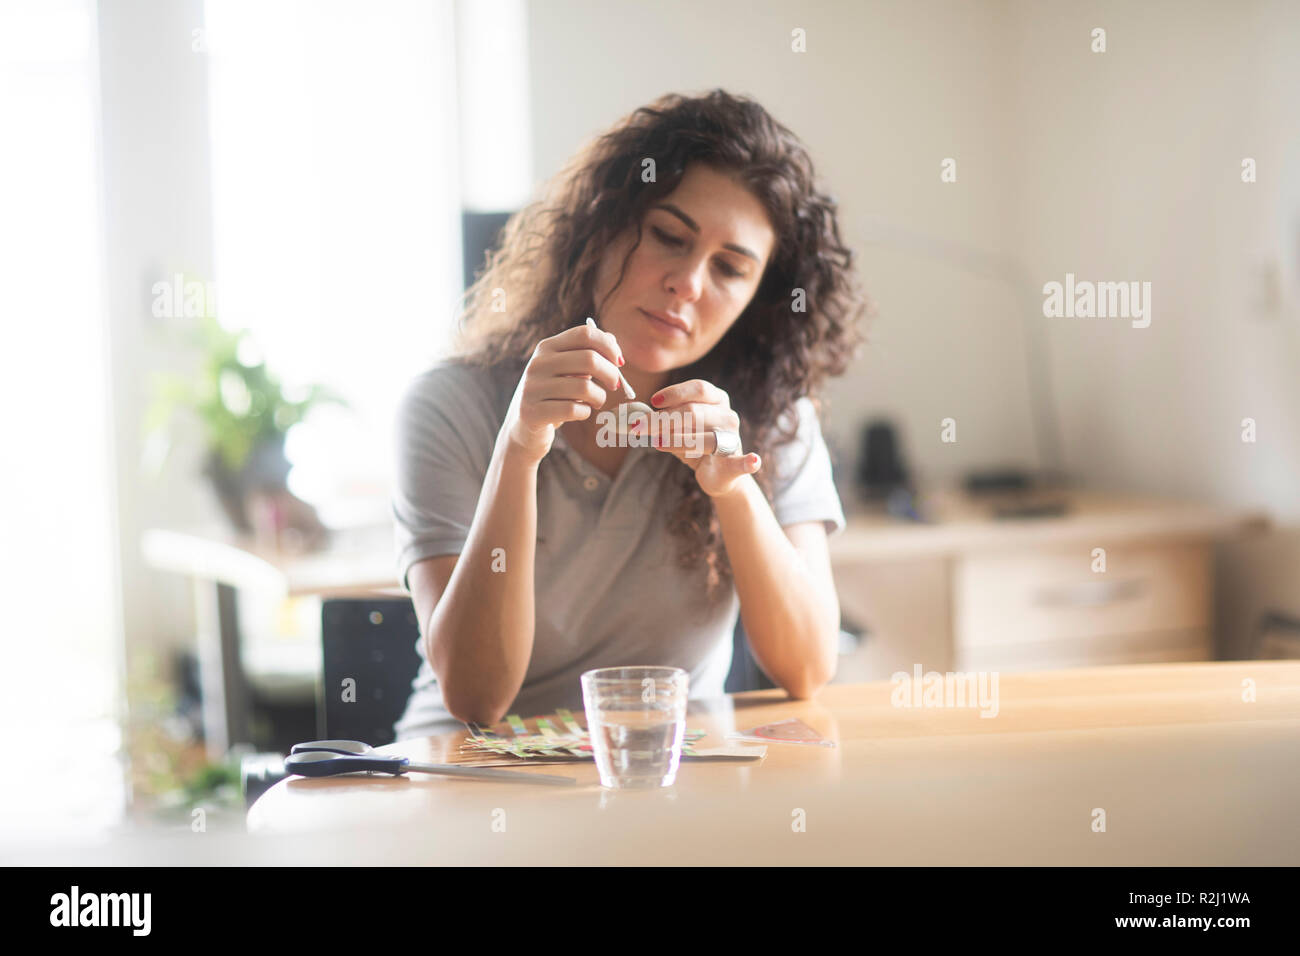 Woman sitting at a table painting a stone Stock Photo